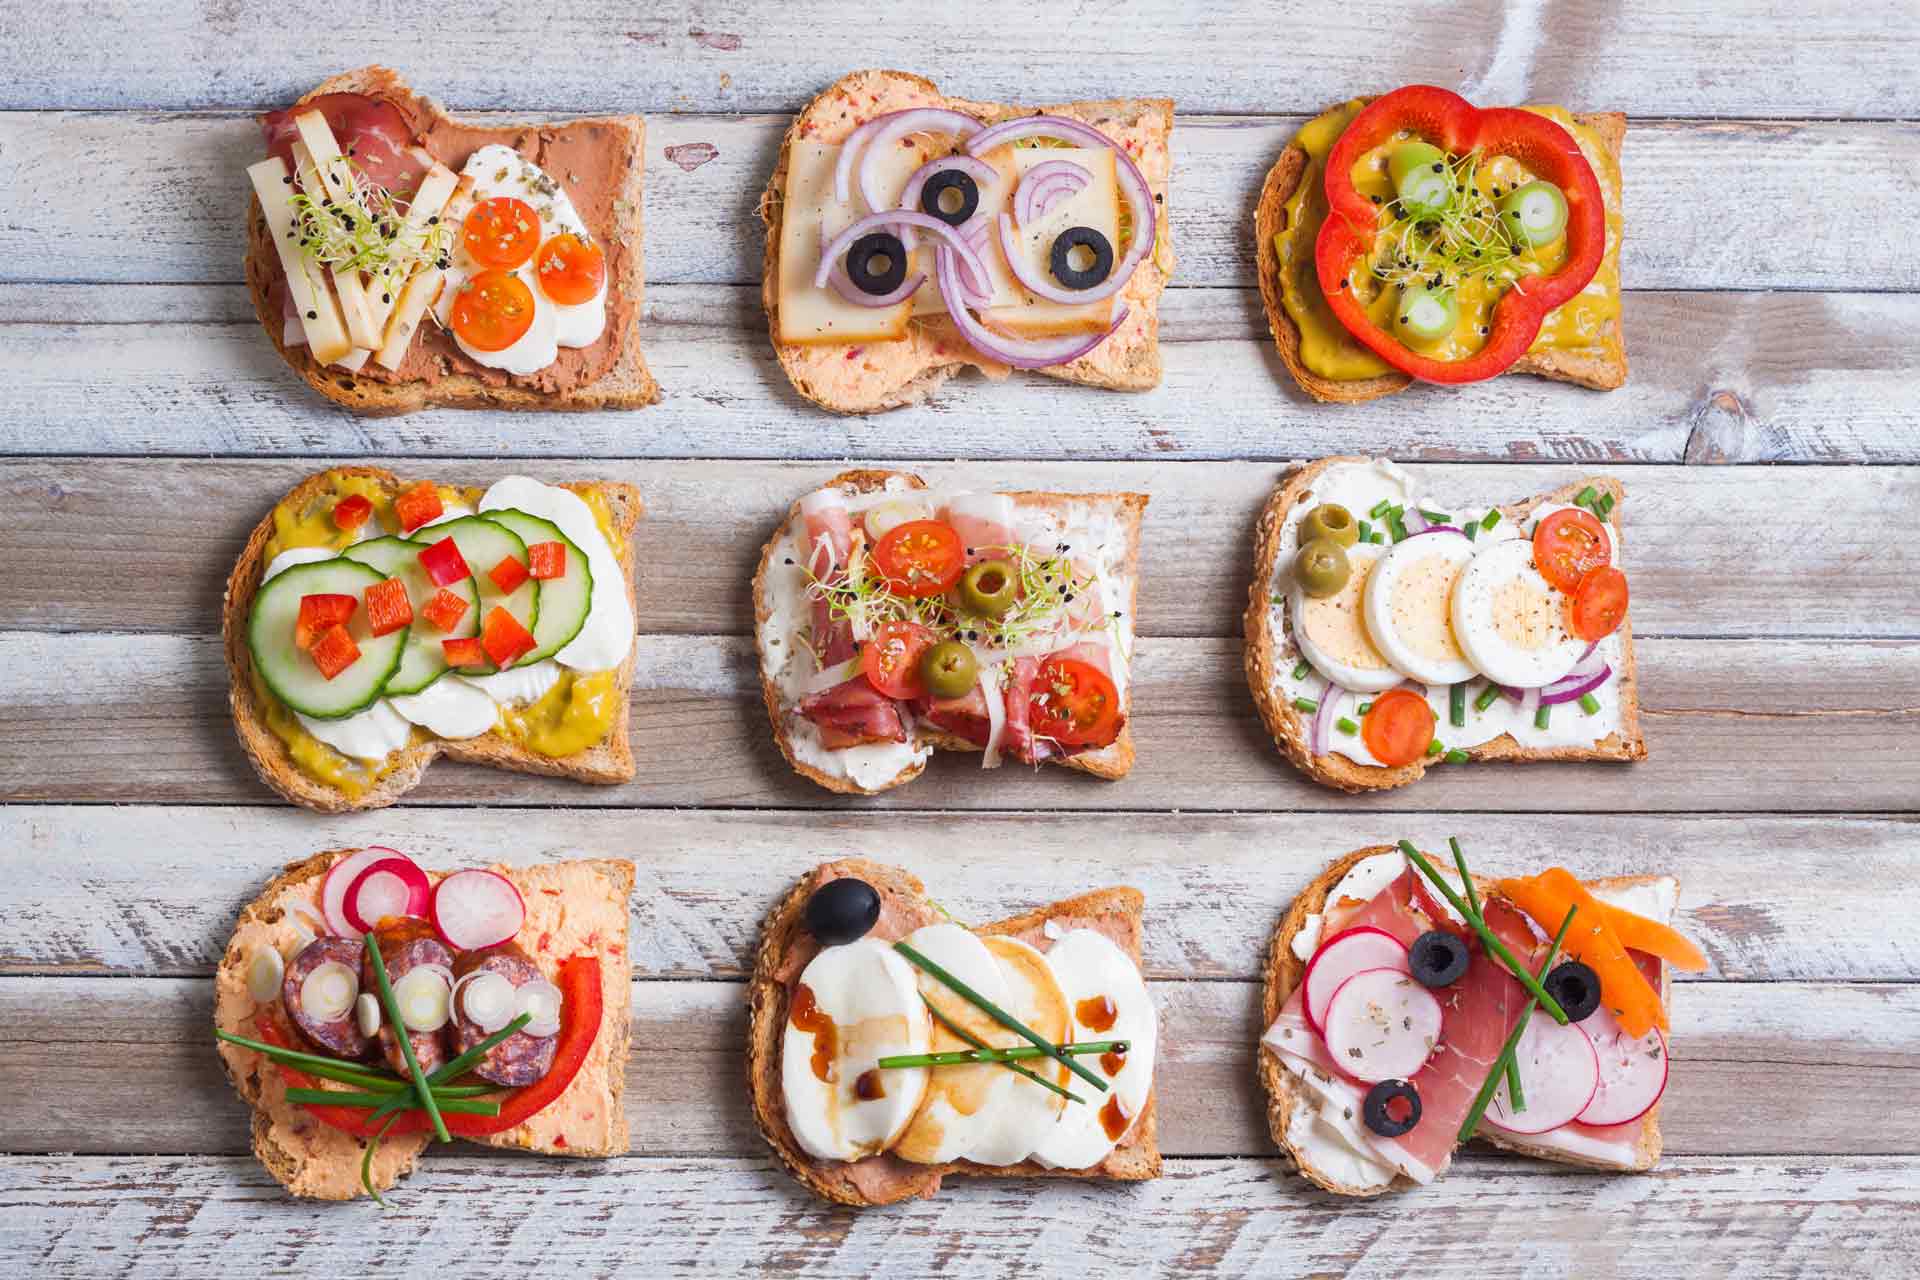 Awesome Sandwich Toppings